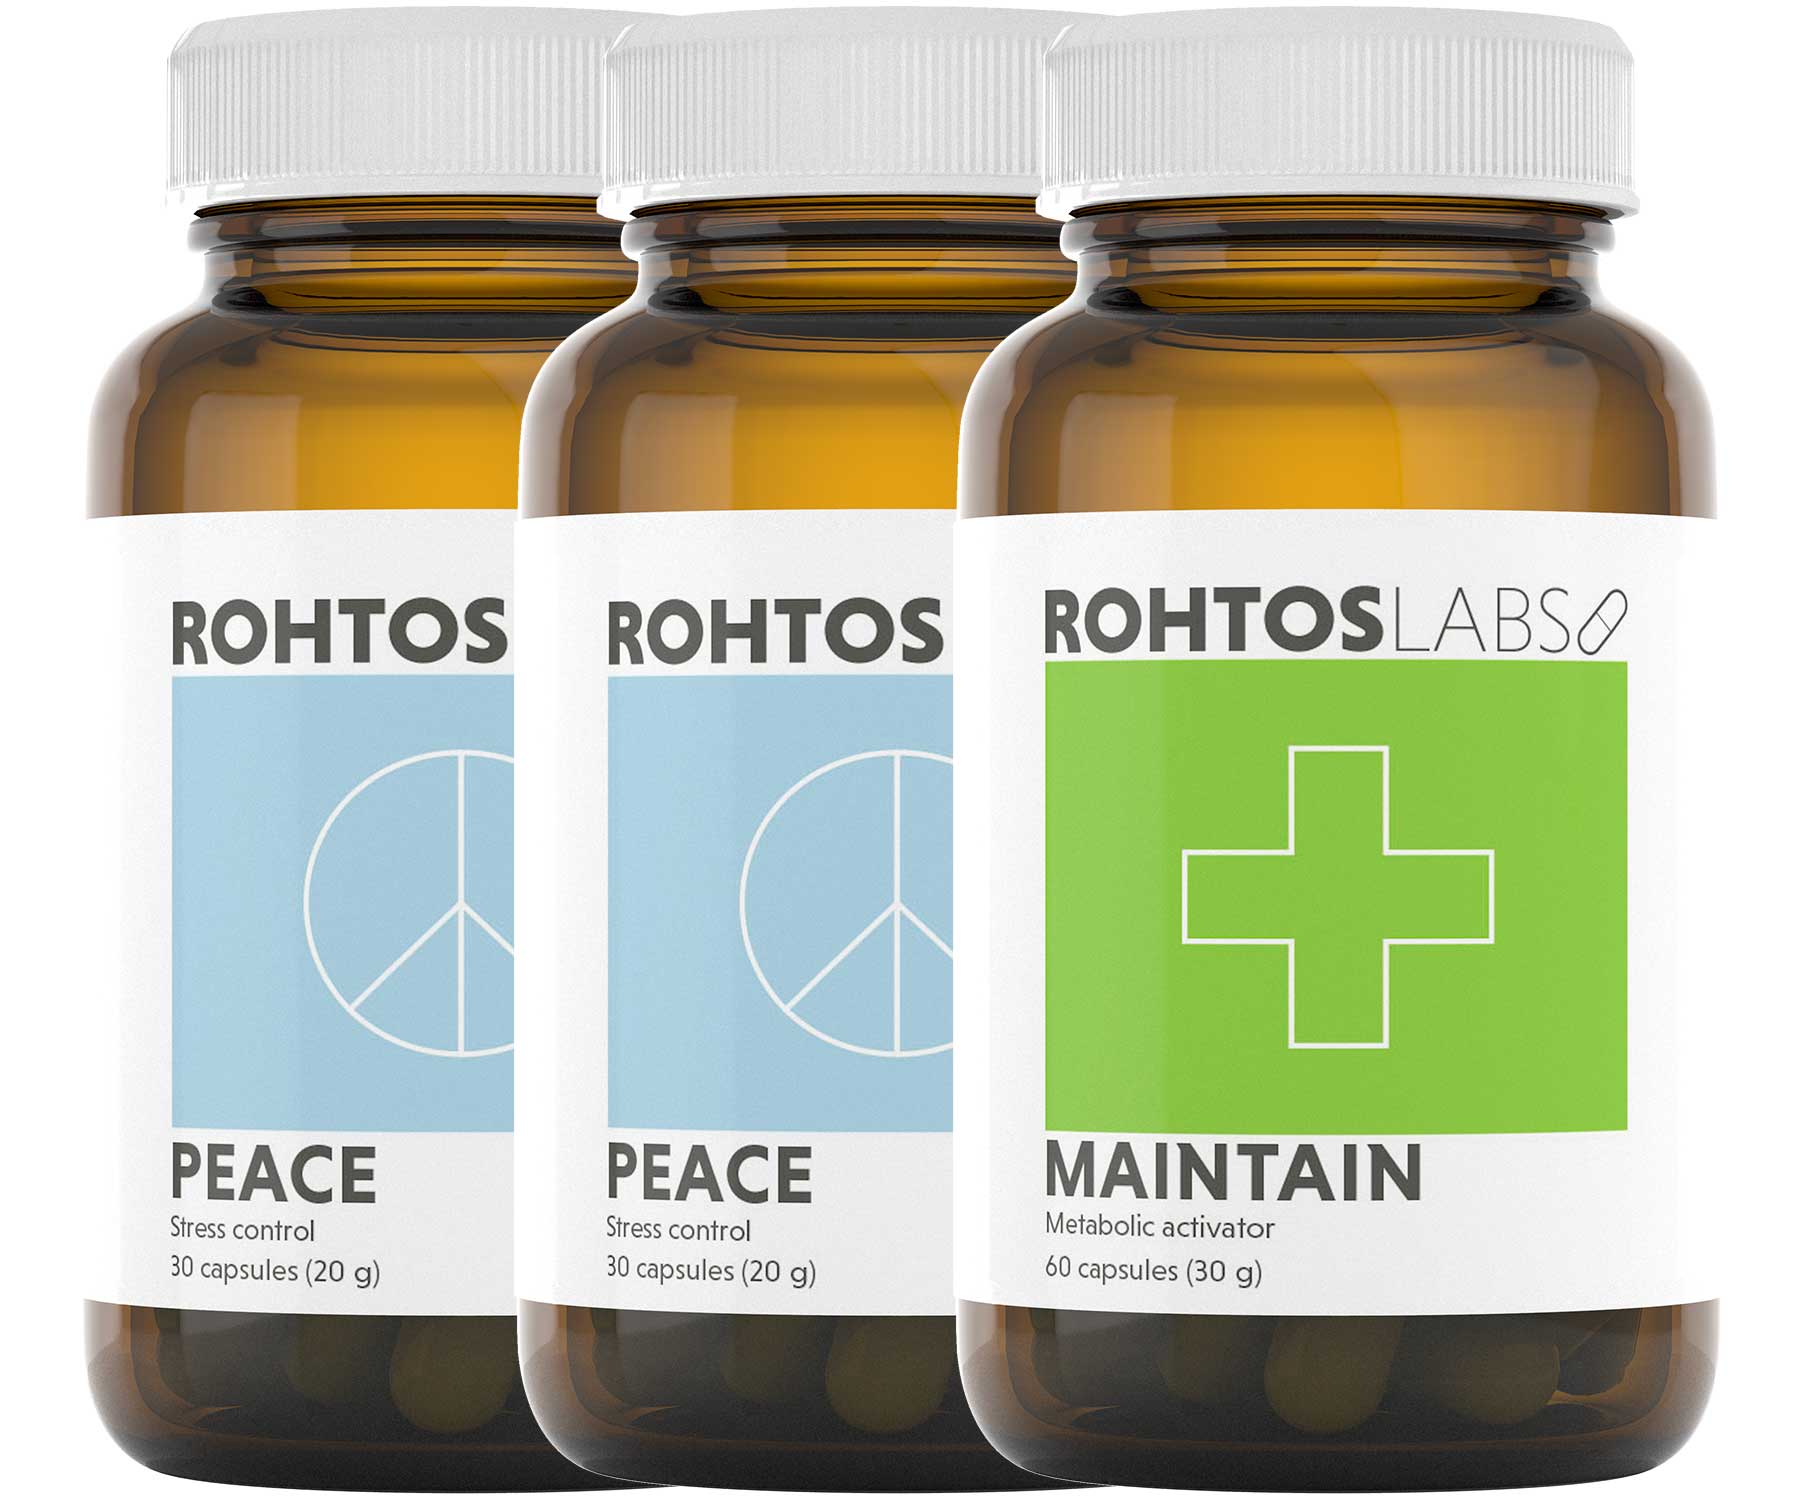 The Serene Bundle combines two bottles of Peace and a bottle of Maintain for a straightforward and continuous 30-day course. Both Peace and Maintain formulations share a common backbone in green tea based bioactive compounds. 